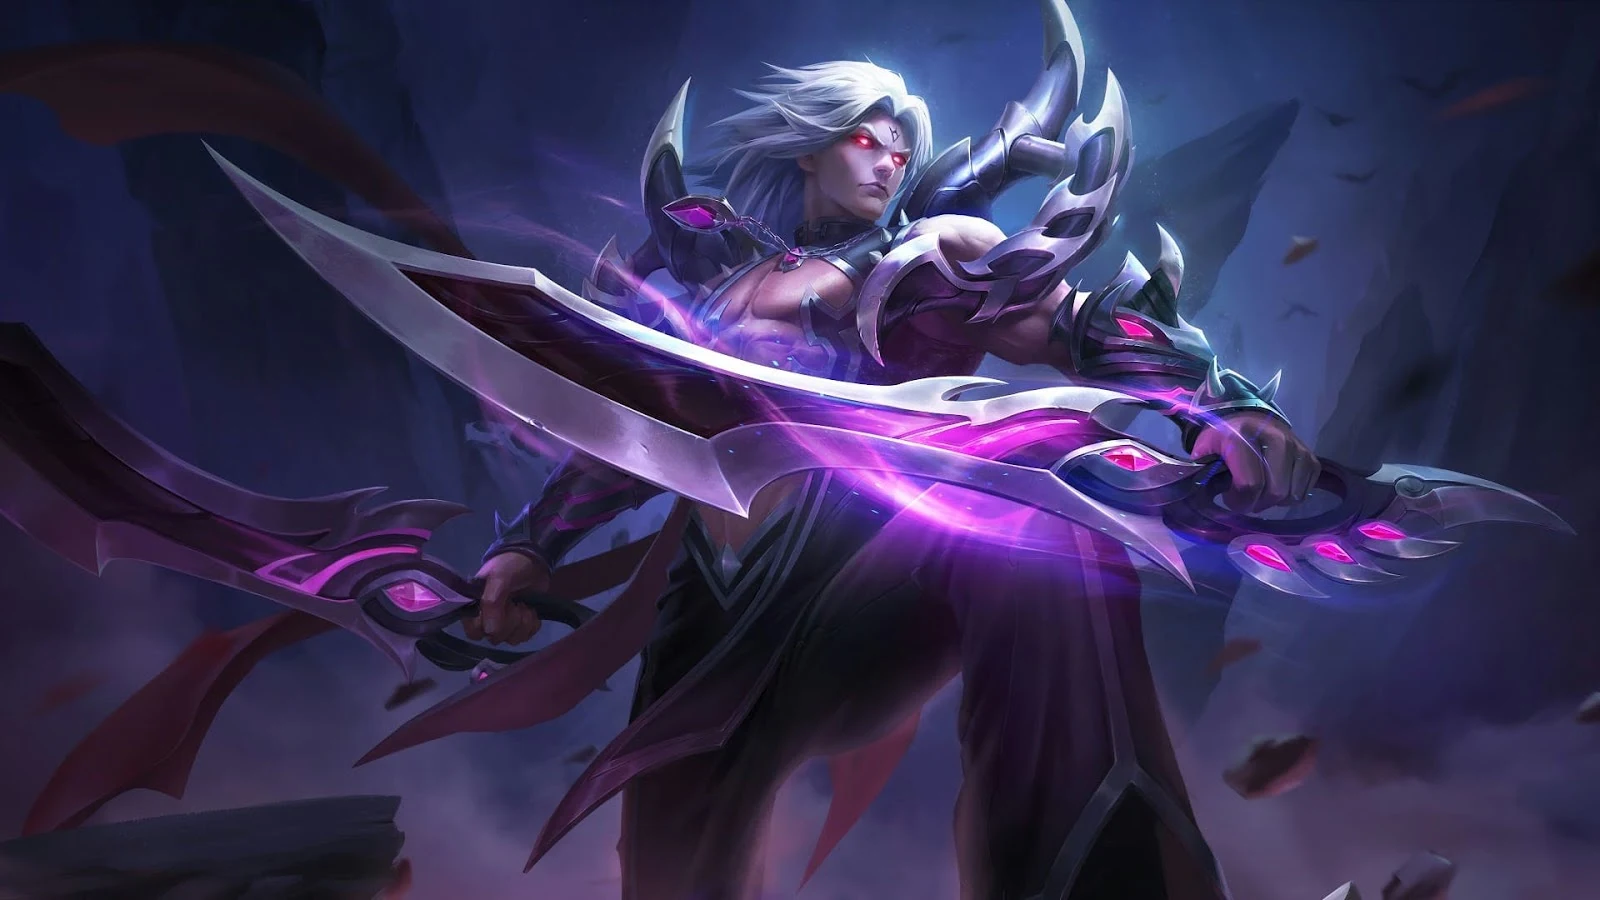 Image#68 10+ Wallpaper Martis Mobile Legends (ML) Full HD for PC, Android & iOS